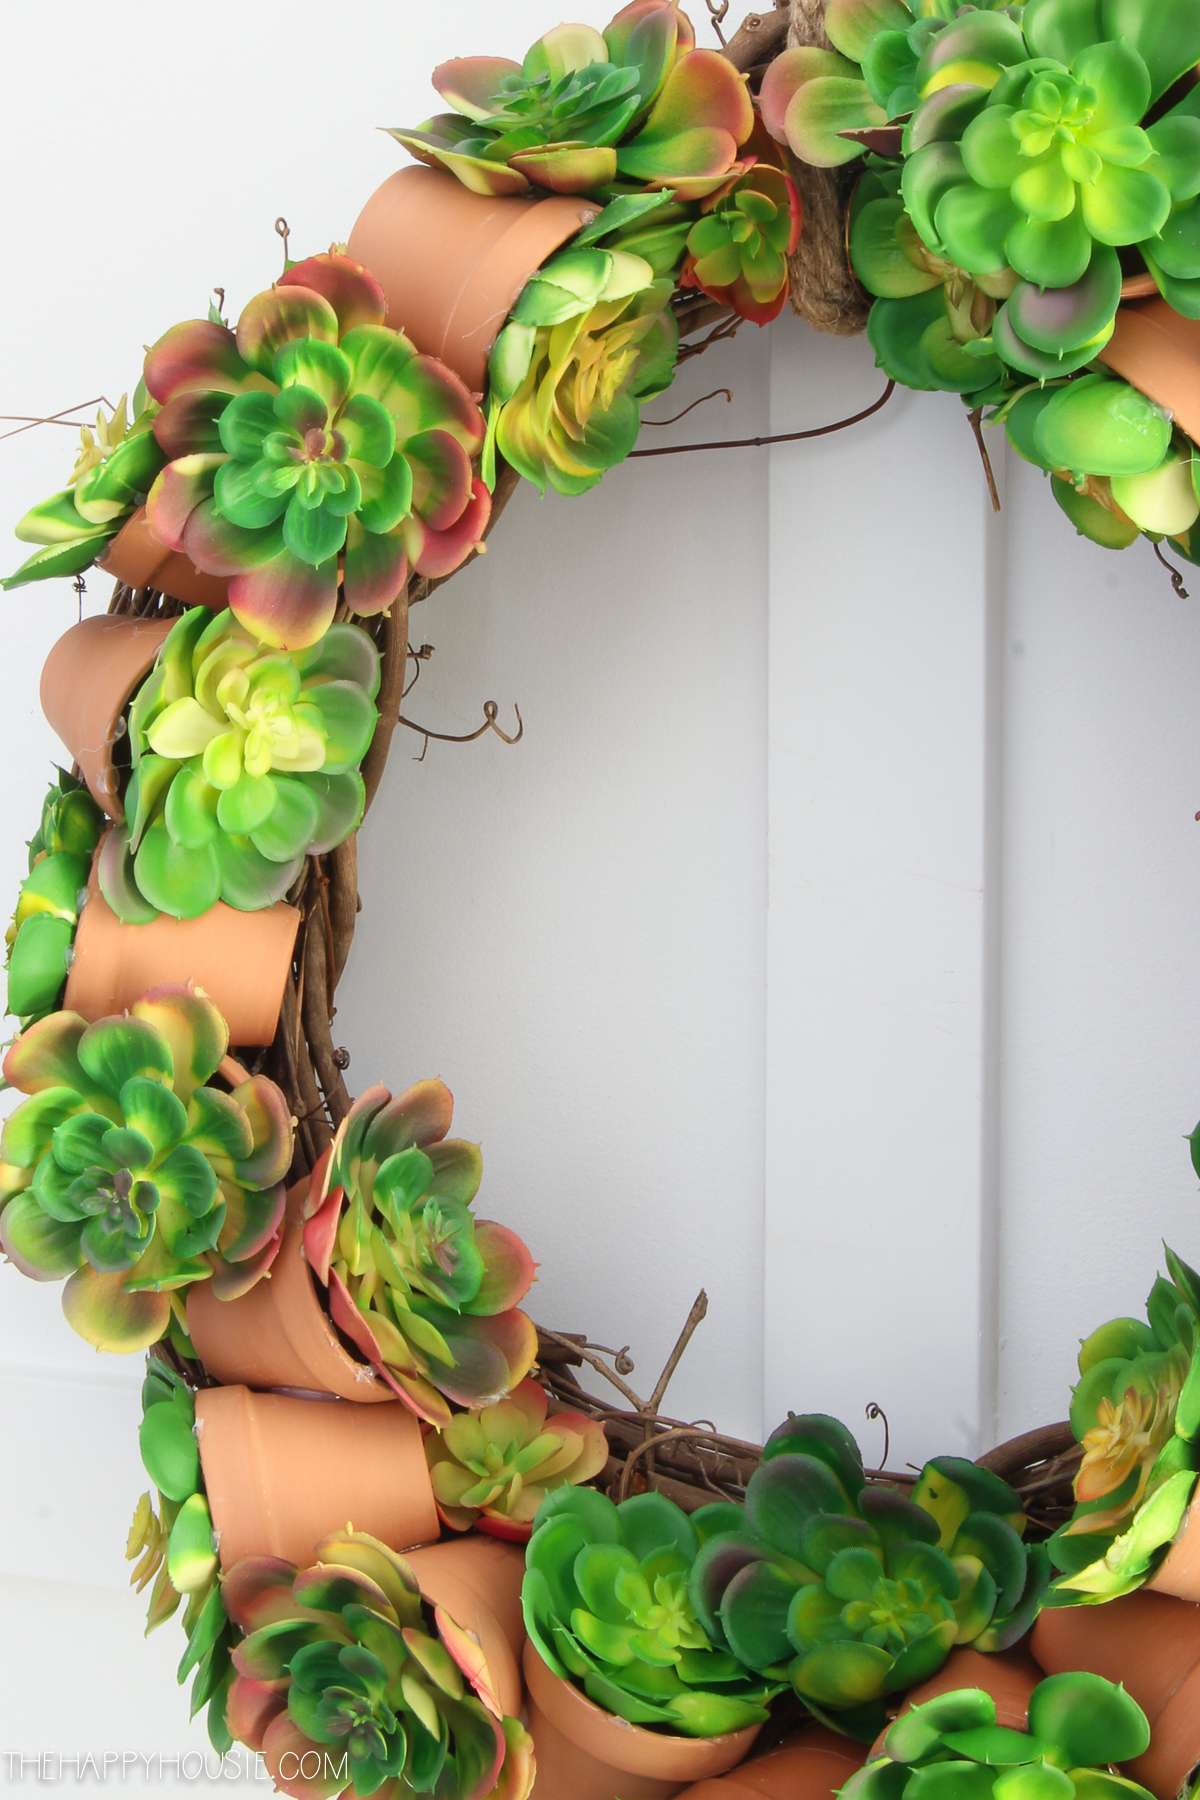 Up close picture of the succulent pots on the wreath.